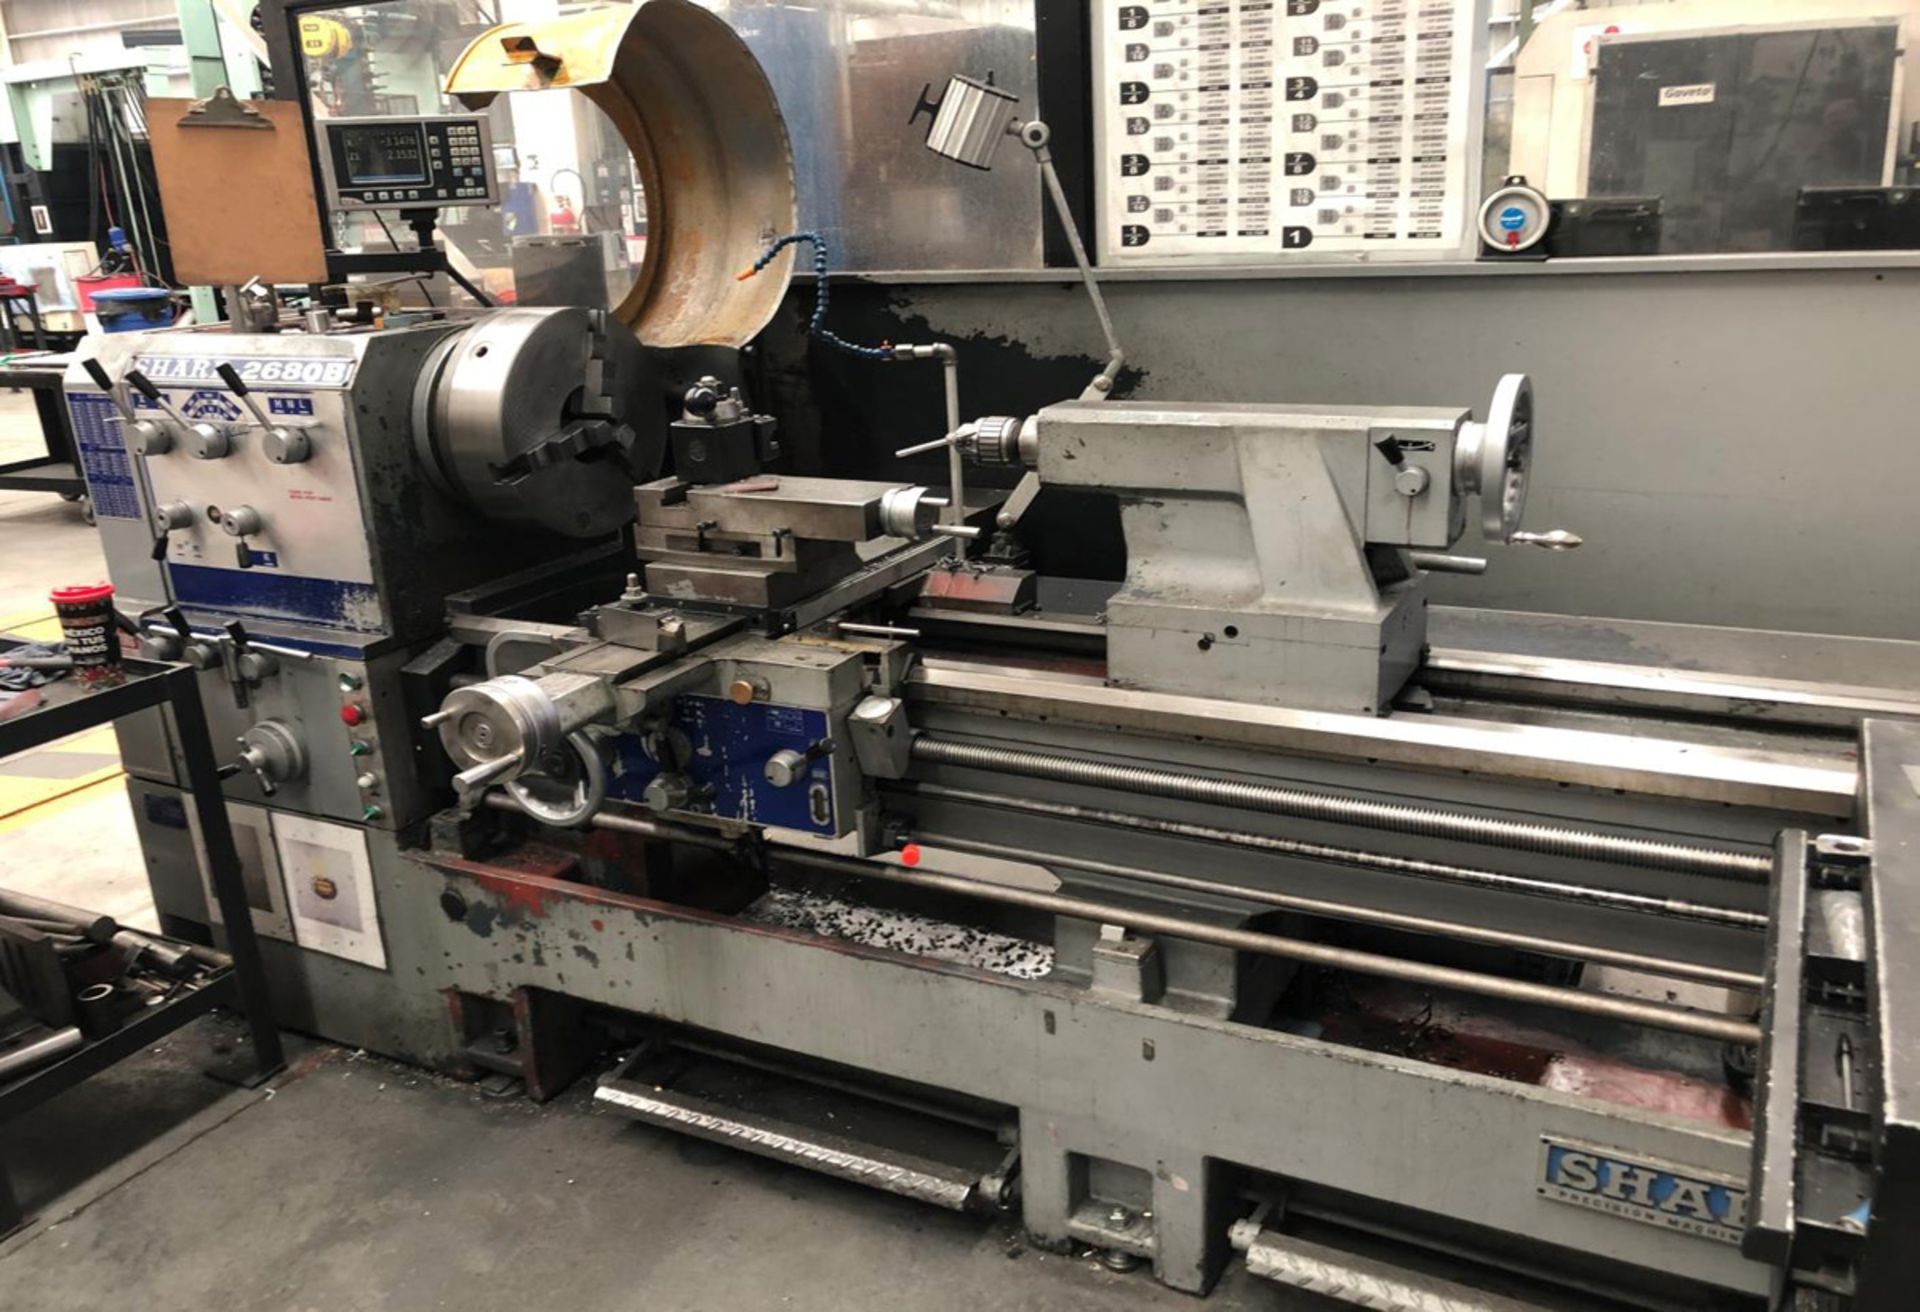 SHARP (2014) 2680B HEAVY DUTY ENGINE LATHE WITH 26" SWING OVER BED, 80" BETWEEN CENTERS, 4.5"